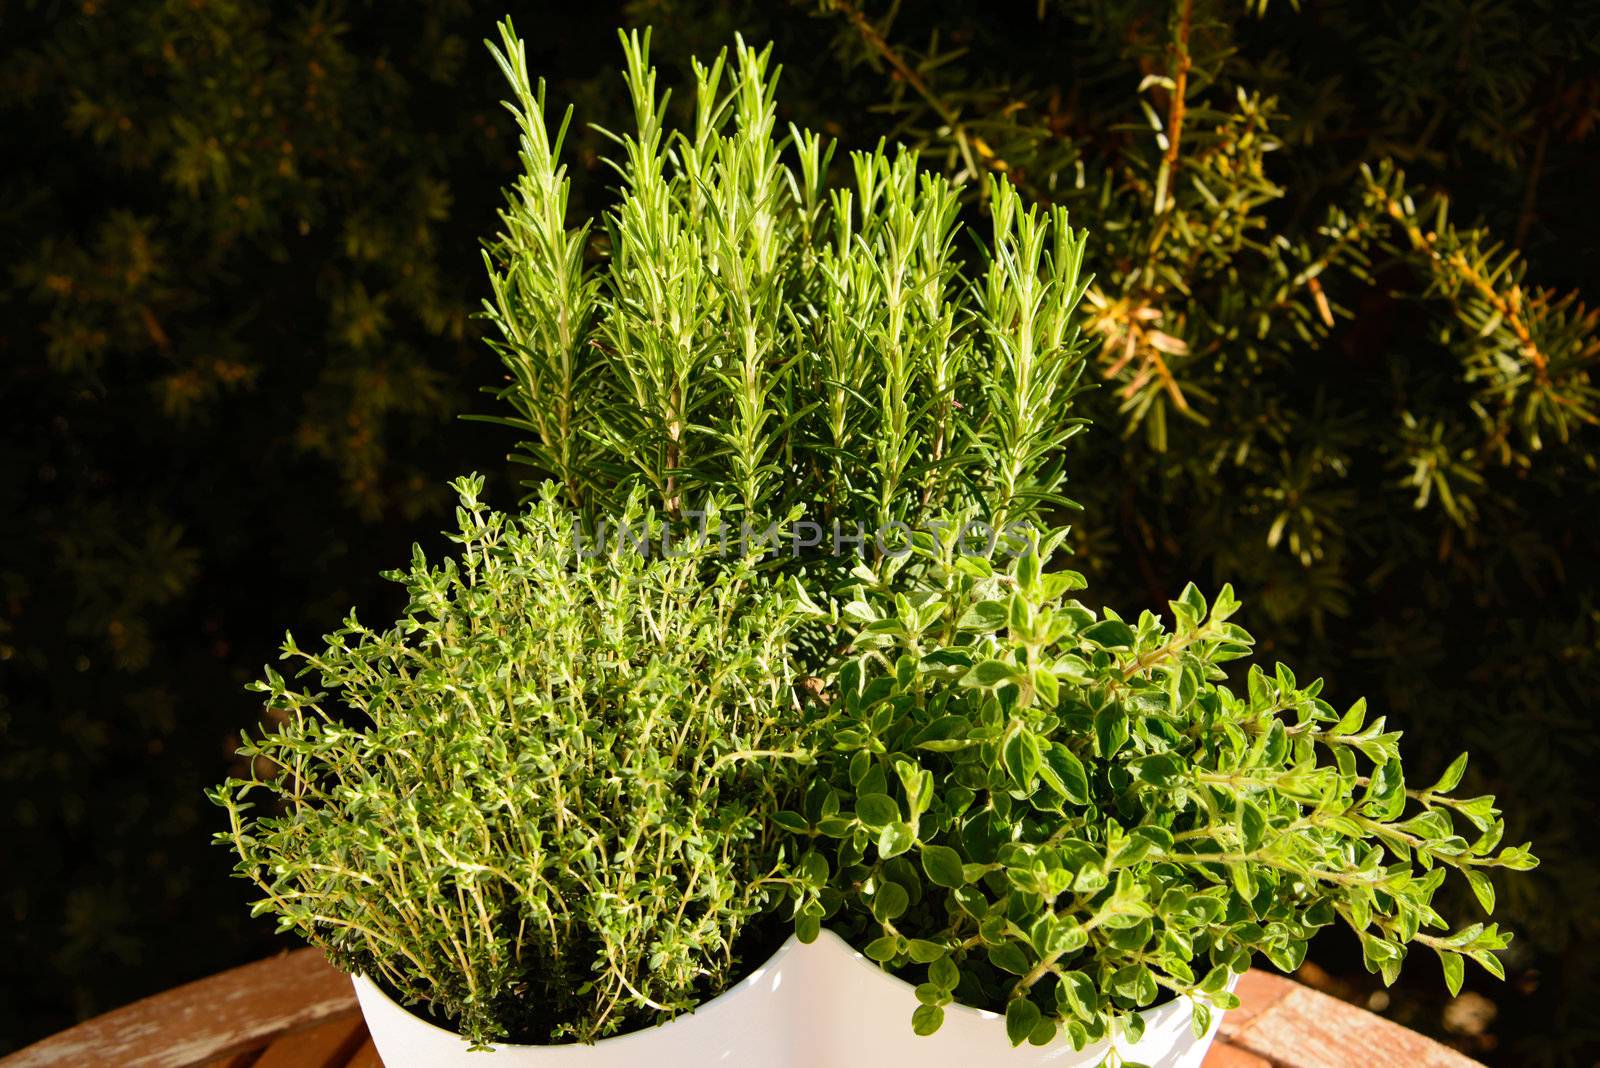 Thyme, oregano and rosemary by GryT